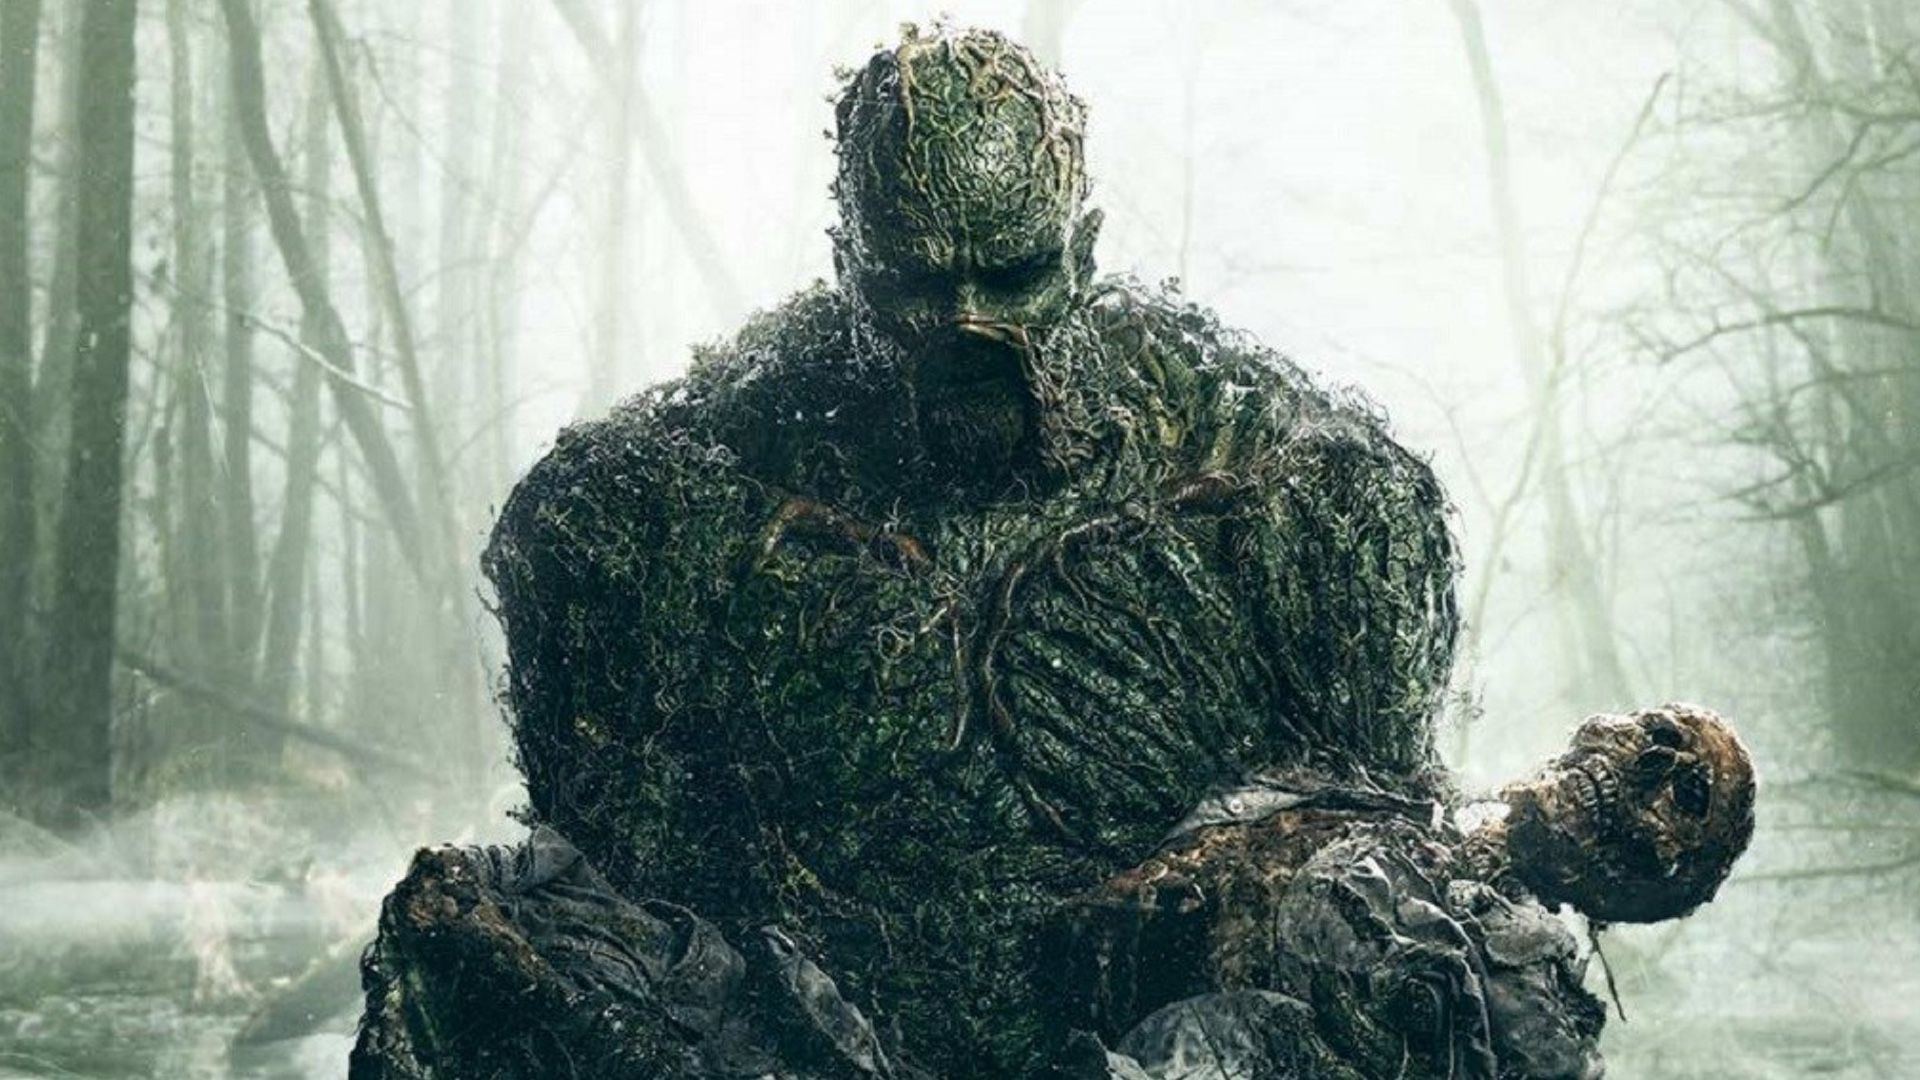 Fans Get an Up Close Look at Previously Planned Villain of DC’s Swamp Thing via Behind-The-Scenes Video